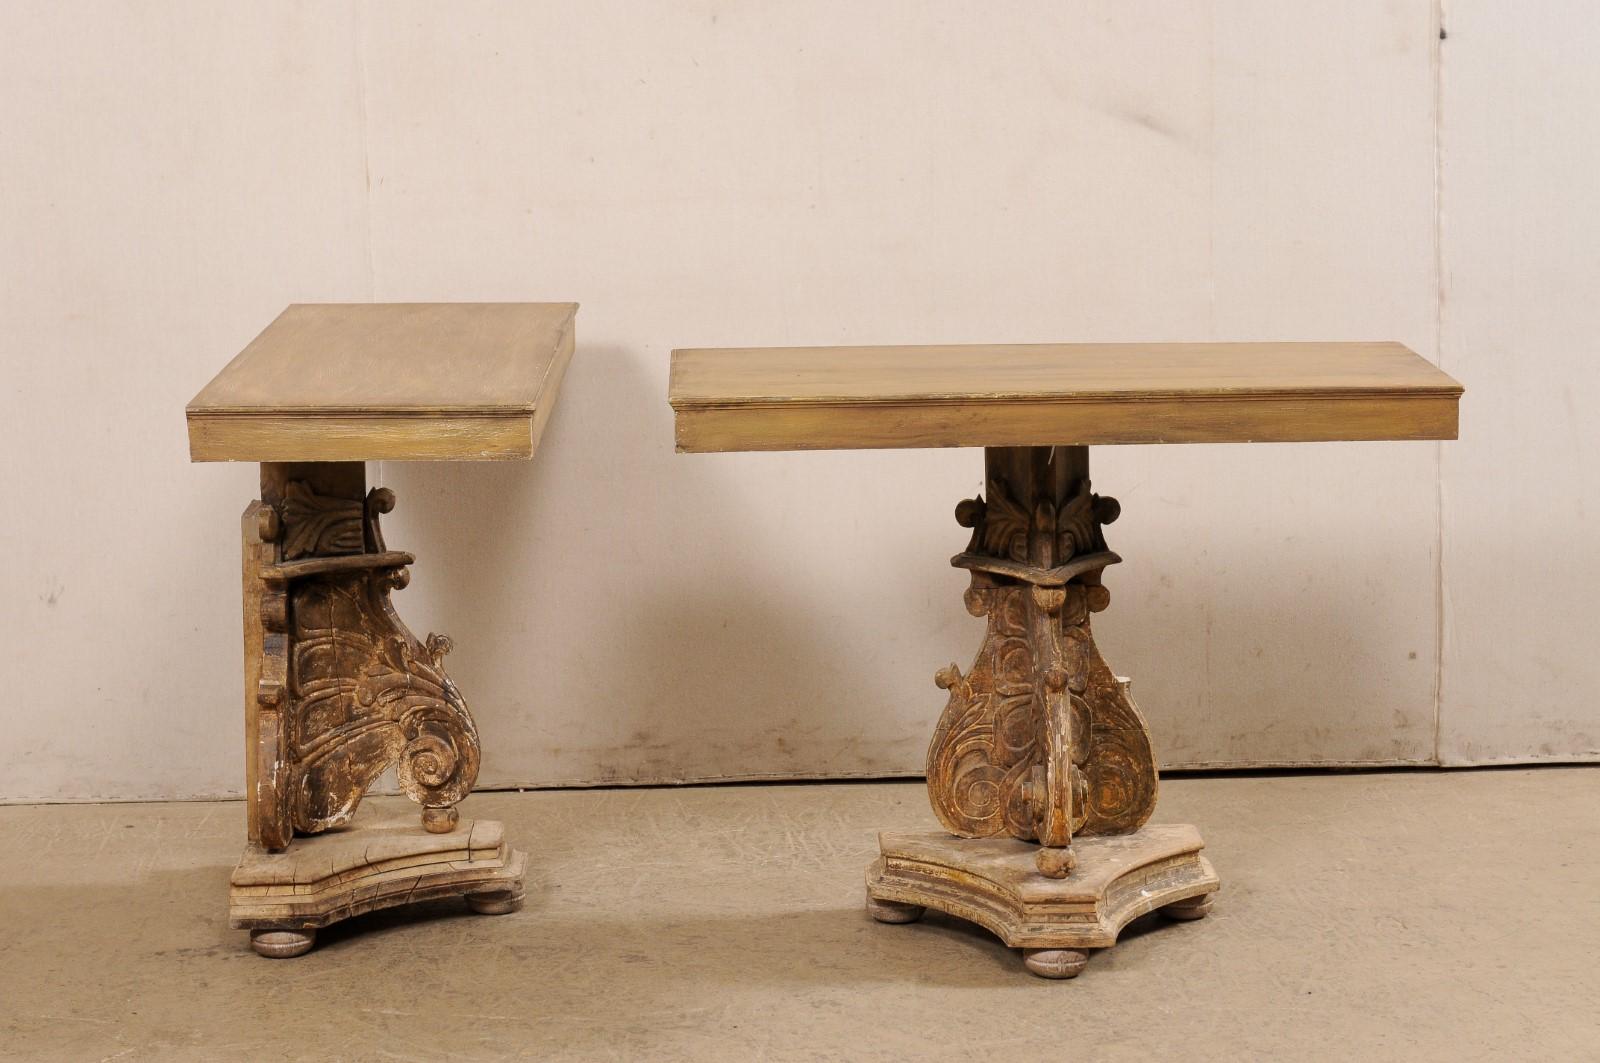 Italian Pair of Wall Consoles Raised on Carved-Wood Late 18th C. Pedestal Bases For Sale 4